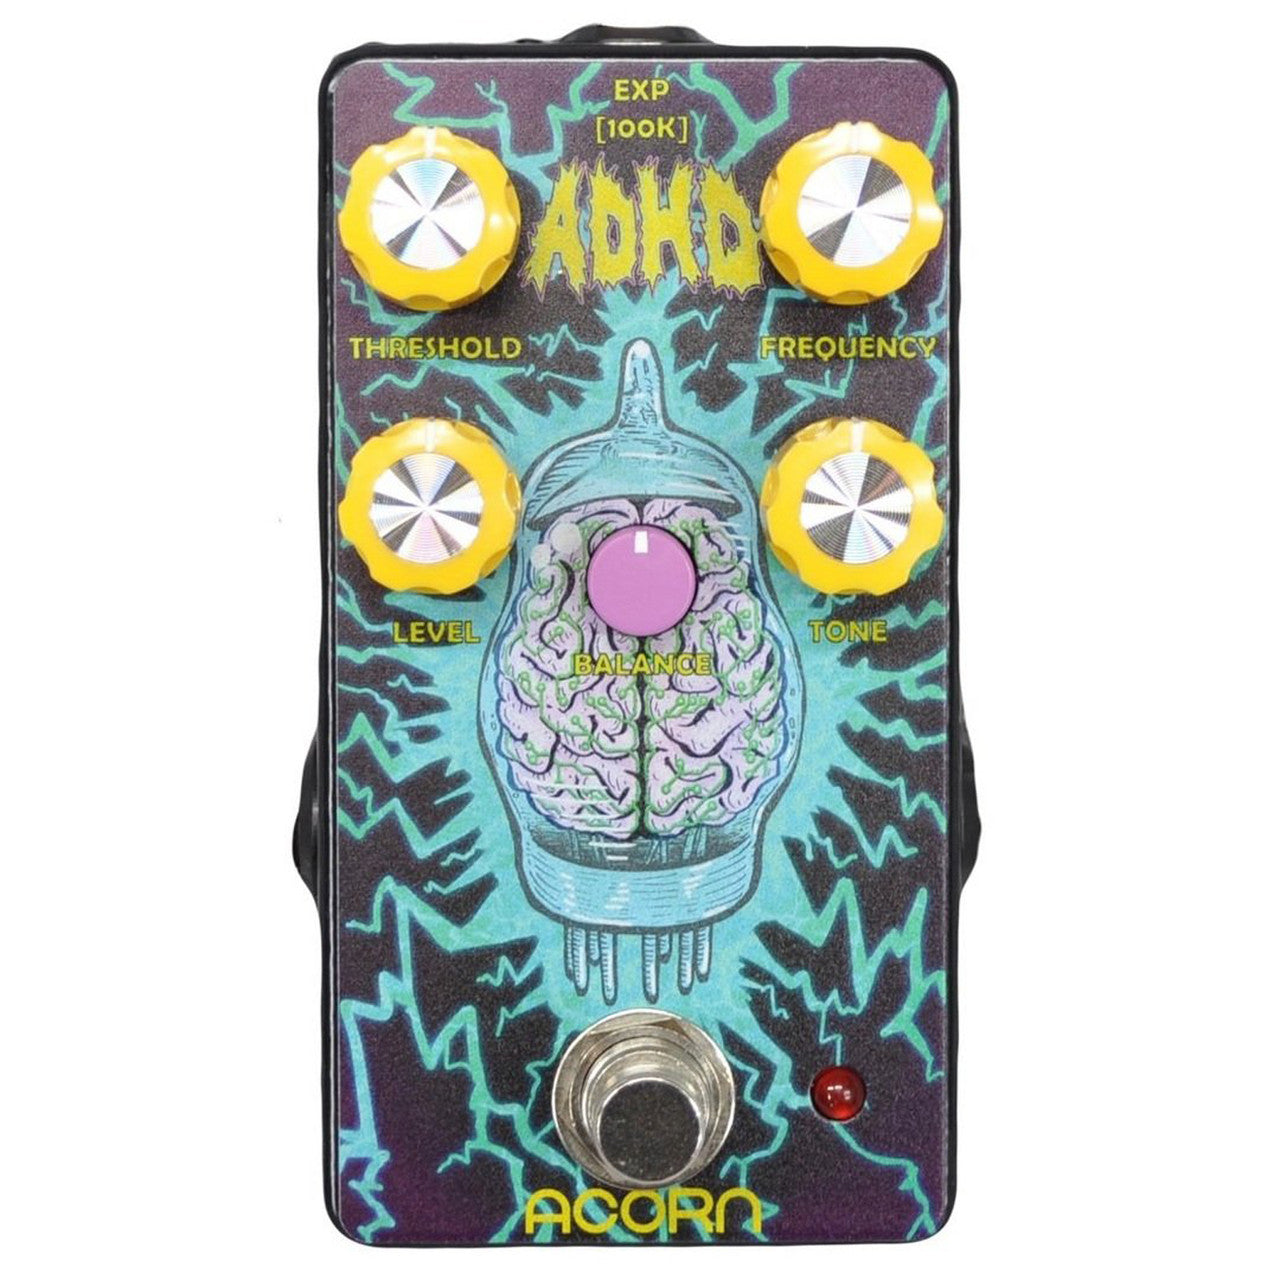 Acorn Amps “ADHD Synth Fuzz”